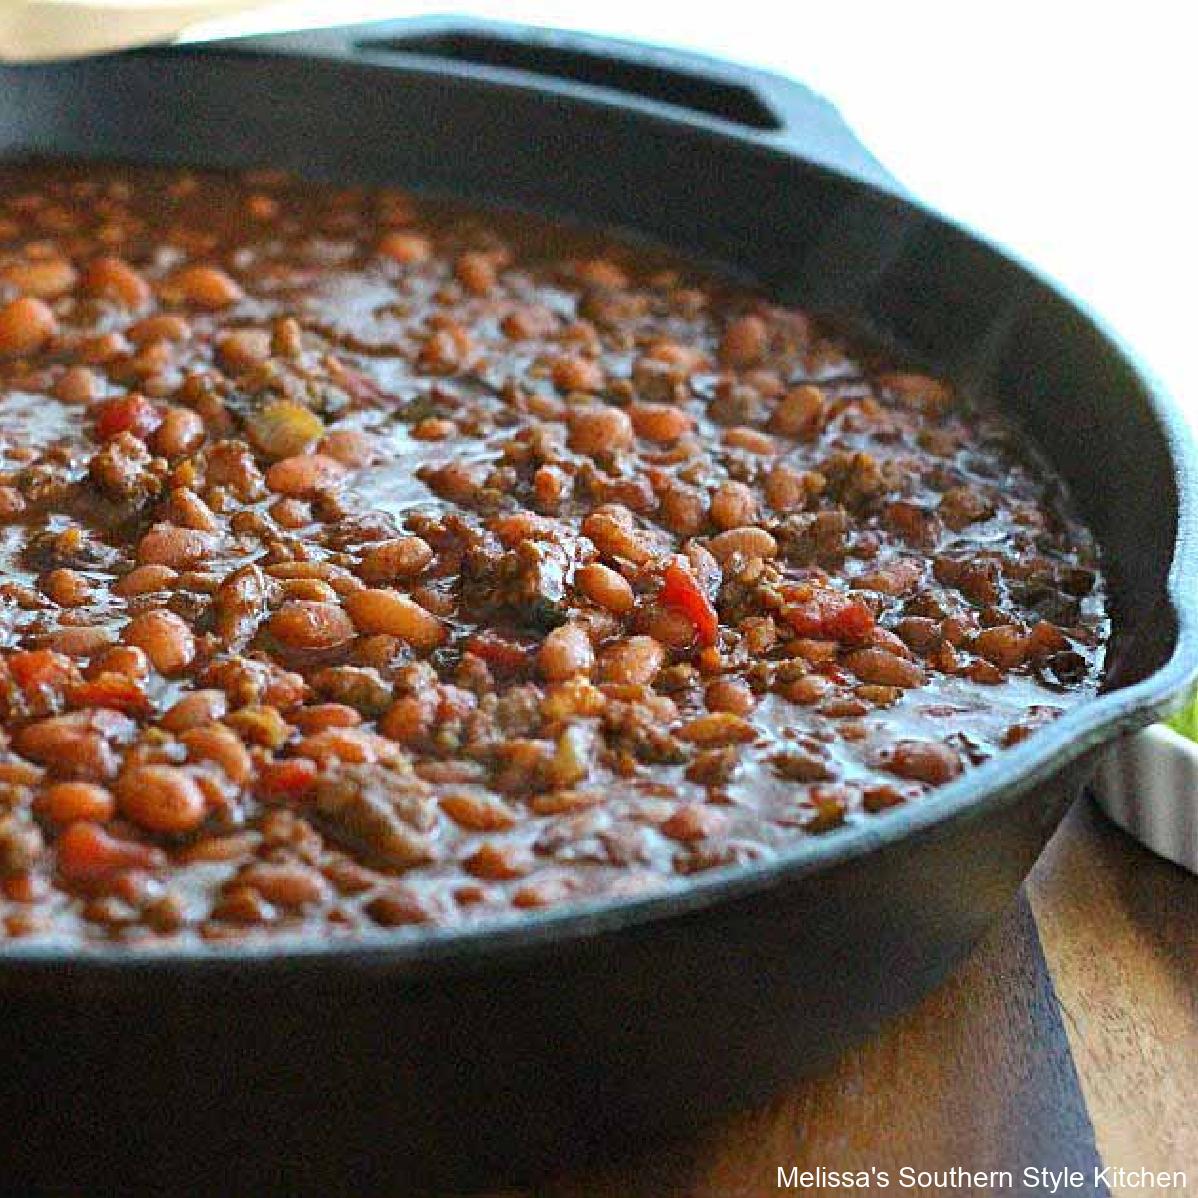  Get ready to dive into a bowl of smoky, saucy Southern Barbecue Baked Beans.